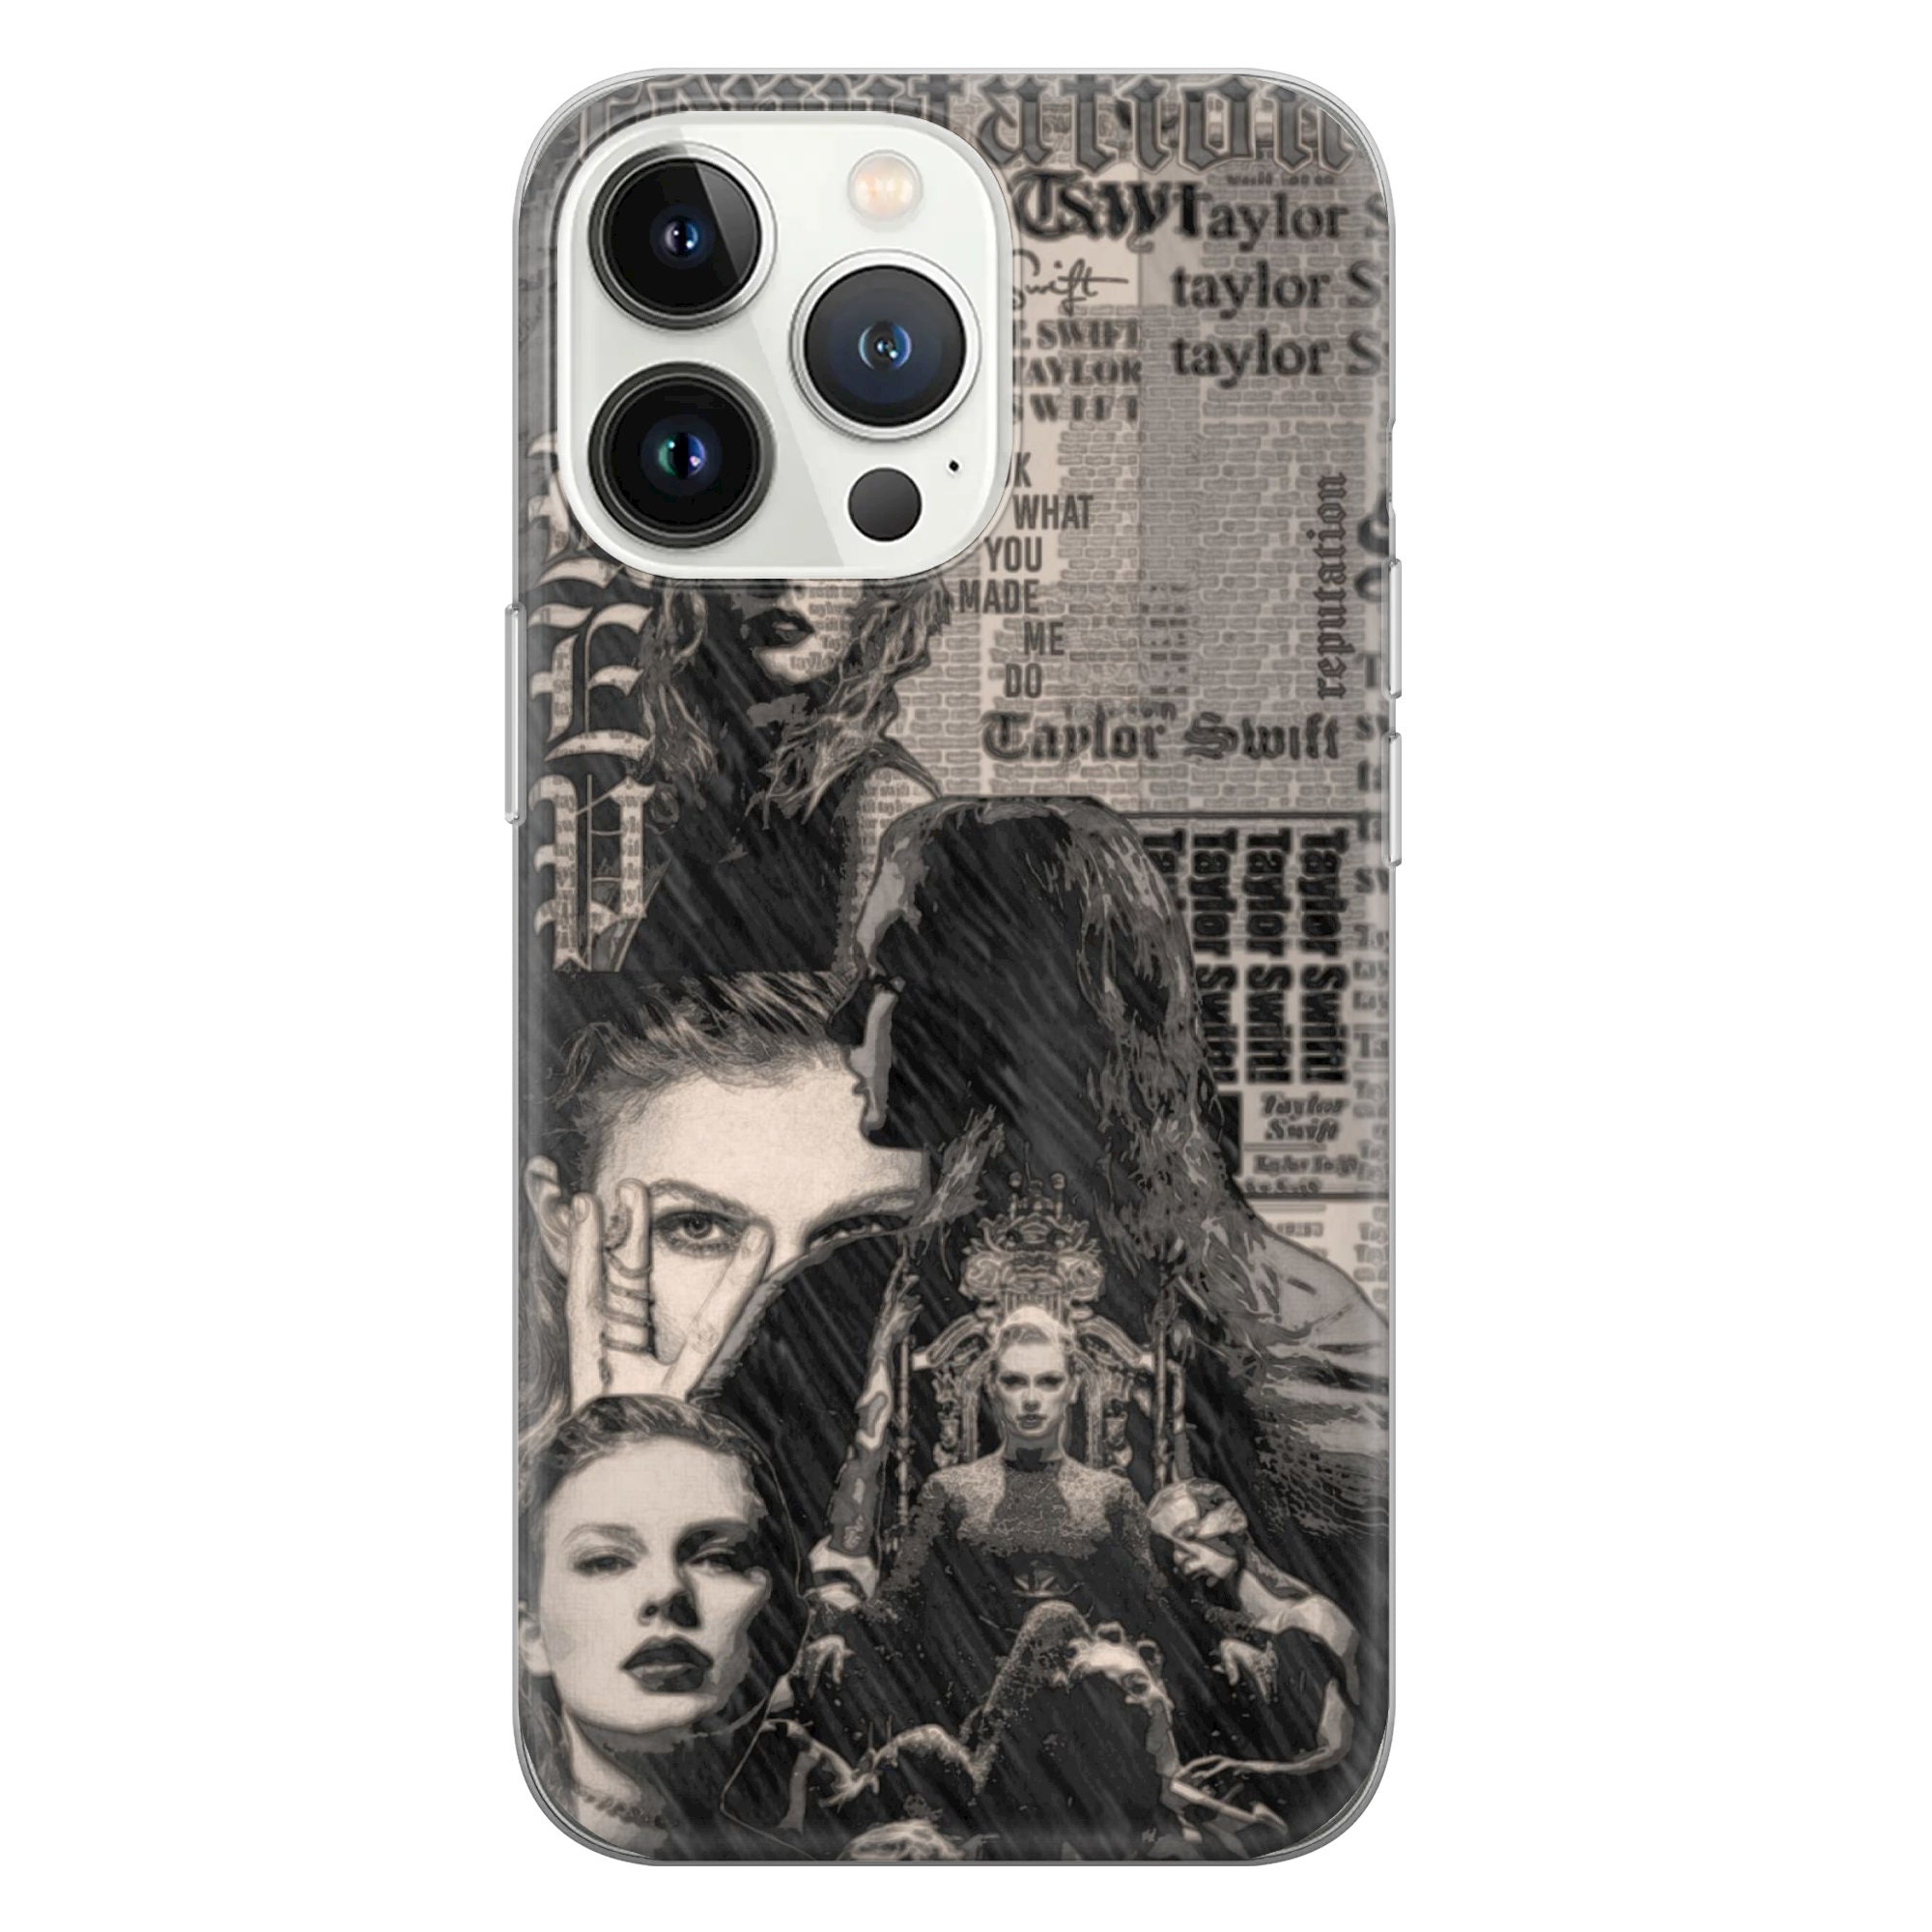 Taylor Folklore Phone Case Eras Collage Cover for iPhone